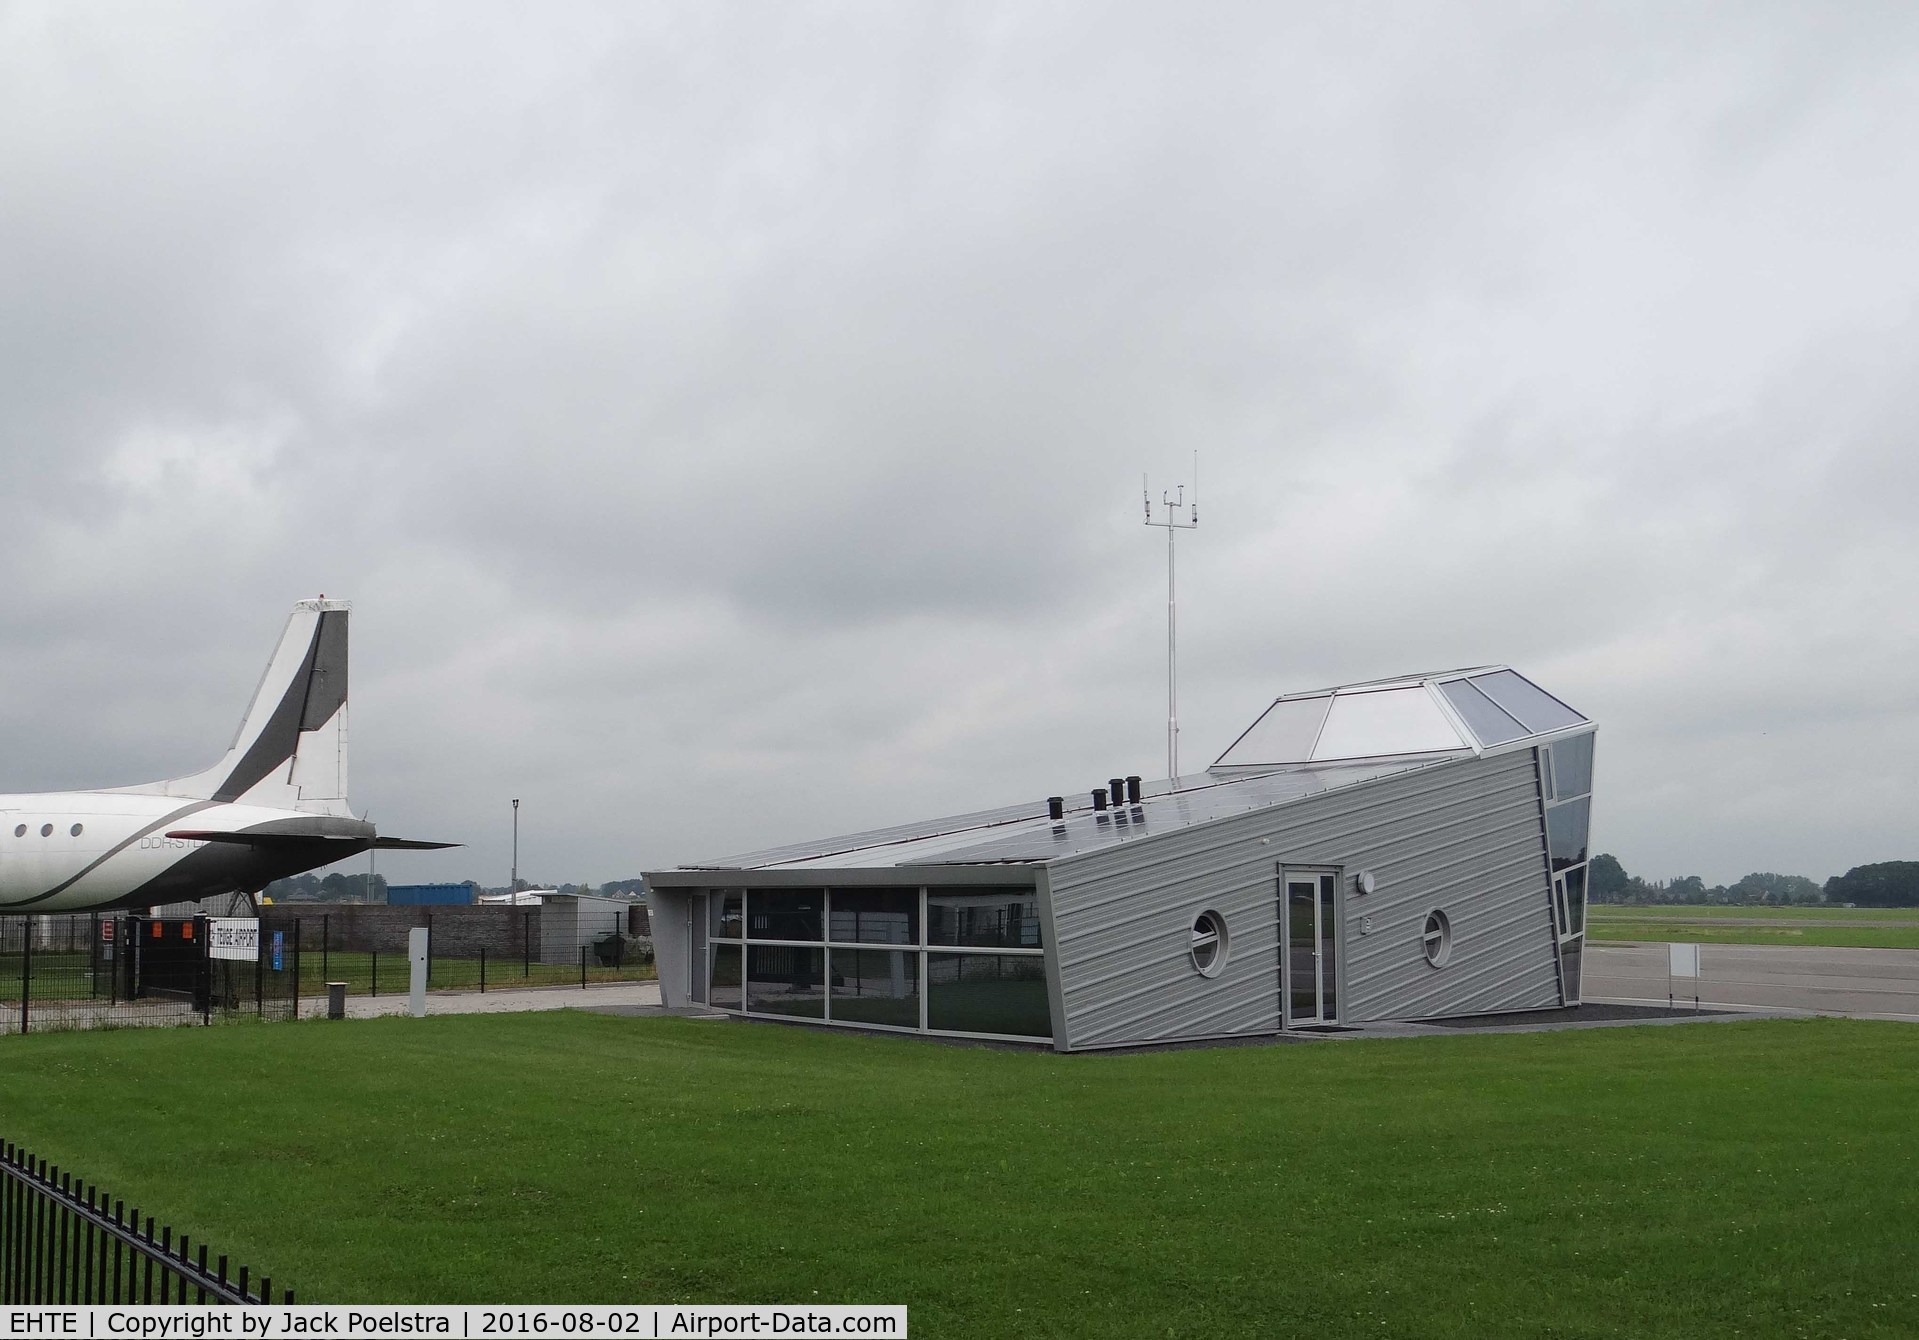 Teuge International Airport, Deventer Netherlands (EHTE) - New airport office at Teuge airport NL